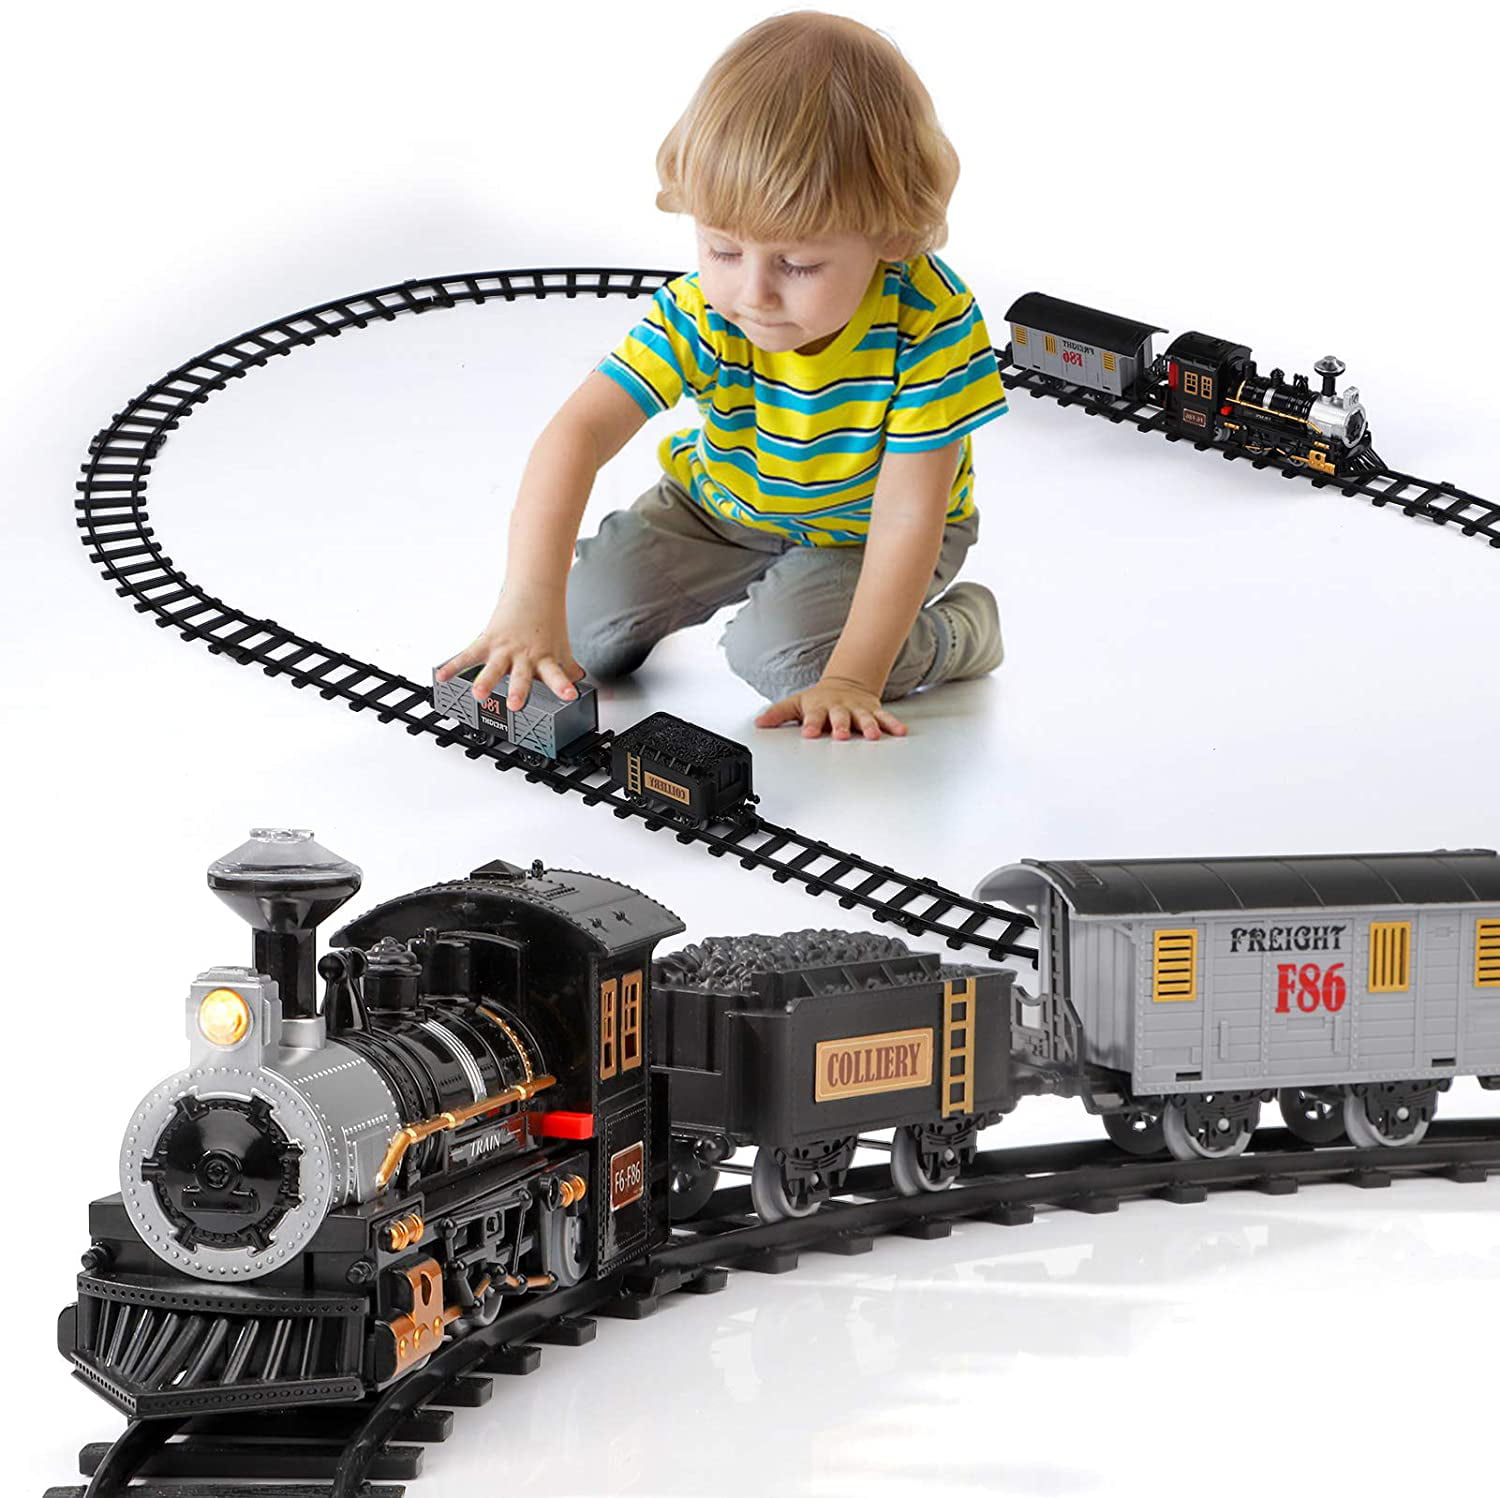 iLearn Toddler Train Set Toy w/ Lights & Sound for Boys Girls Kids Educational Preschool Learning Gift for 1 2 3 4 5 6 Year Old iPlay Baby Buildable Train Tracks Accessories w/ Building Blocks